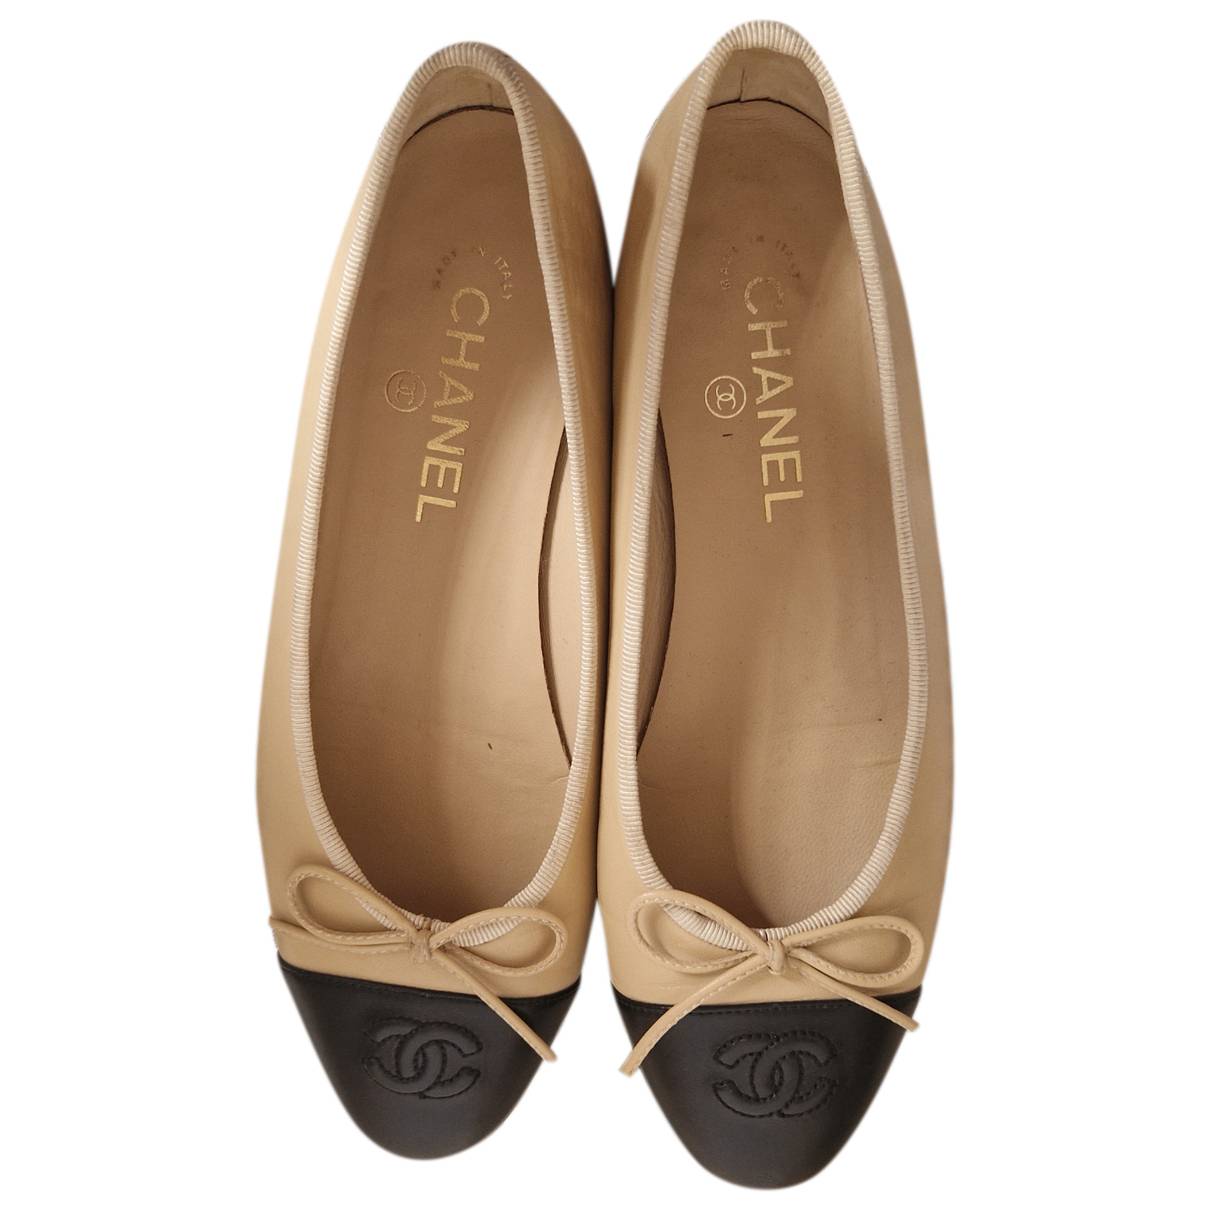 Leather ballet flats Chanel Beige size 38 EU in Leather - 35616789